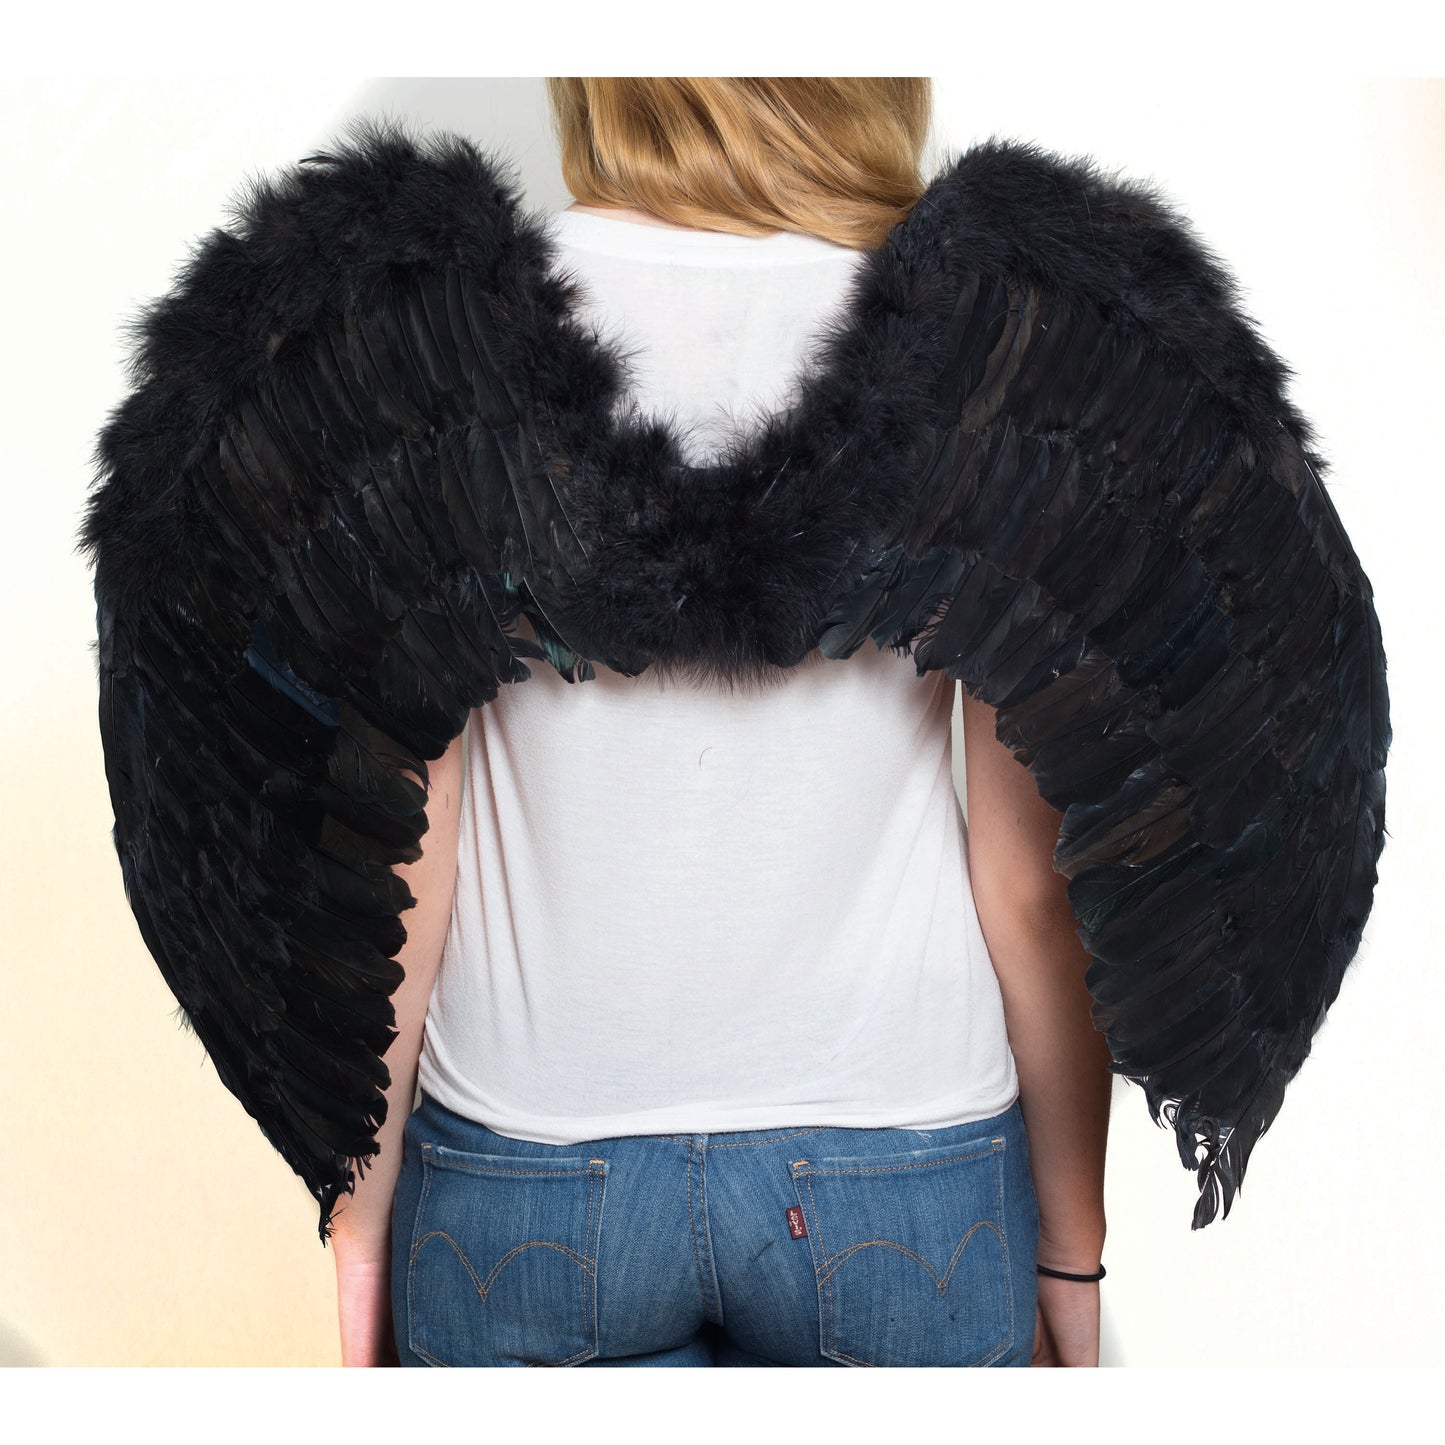 Black Feather Wings - 31"